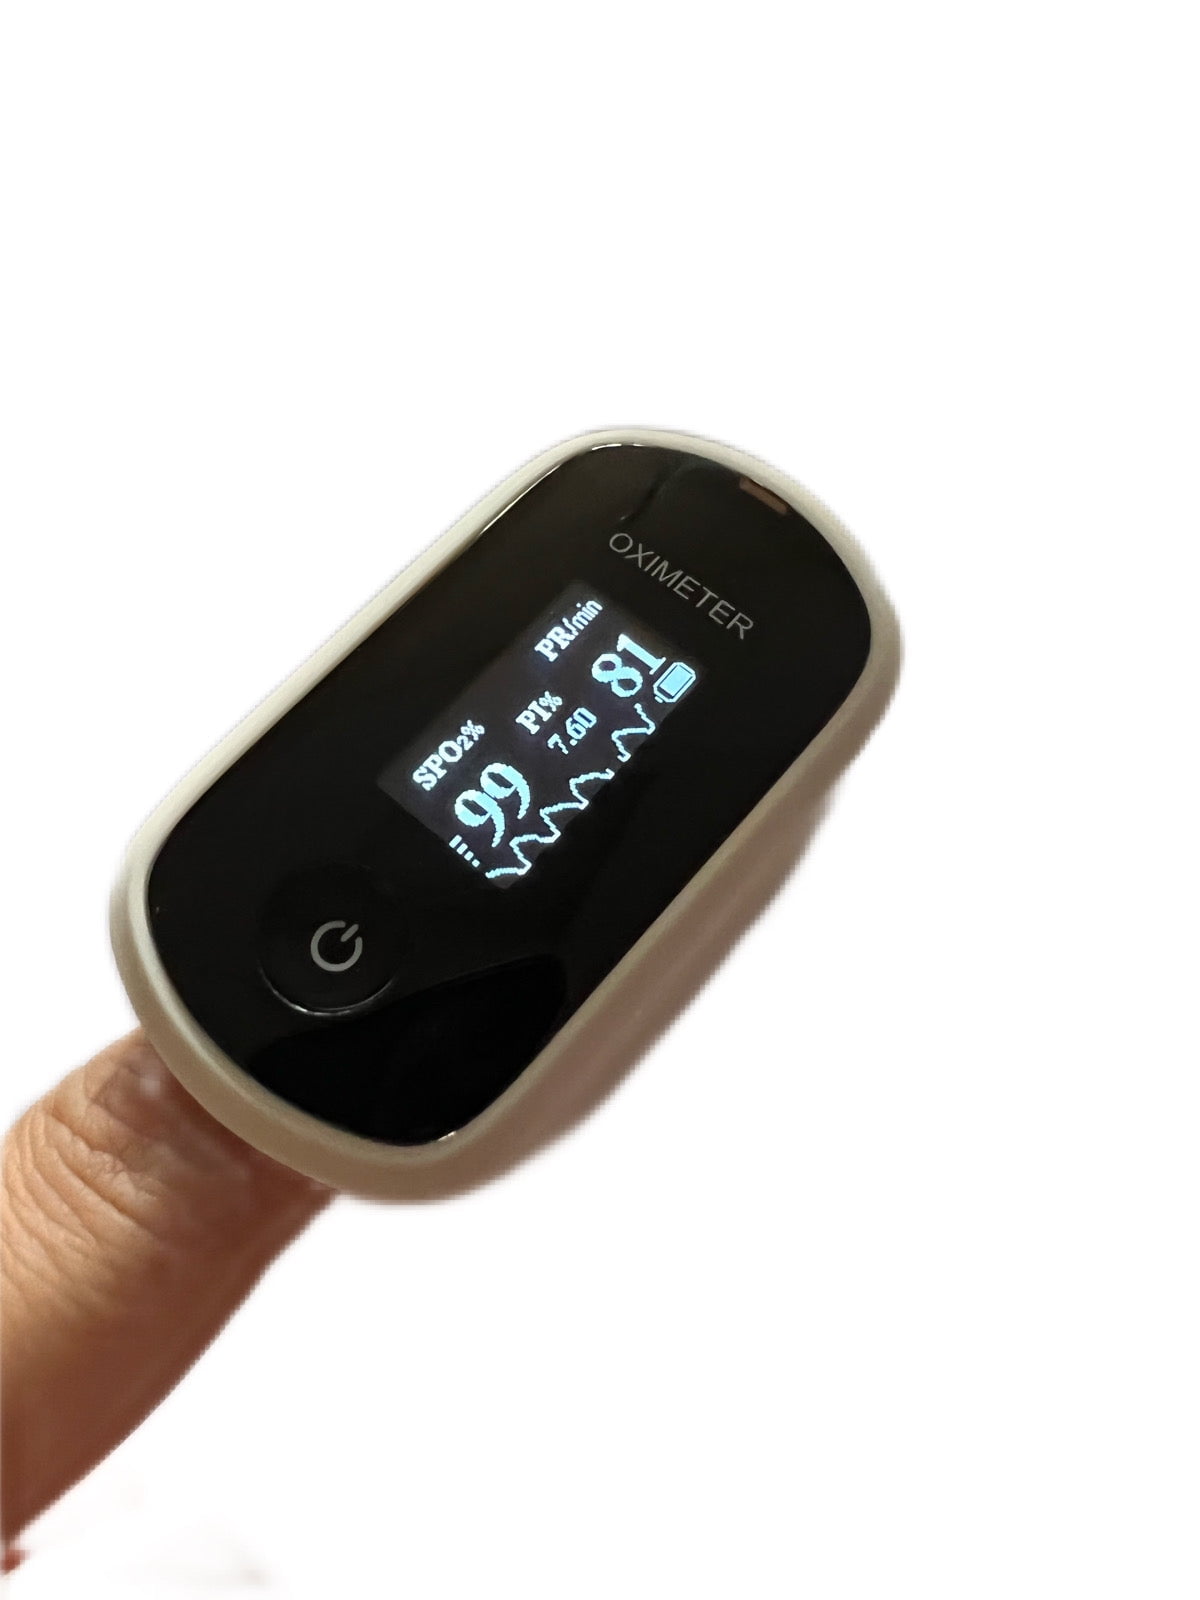 FDA panel asks for improvements in pulse oximeters - STAT